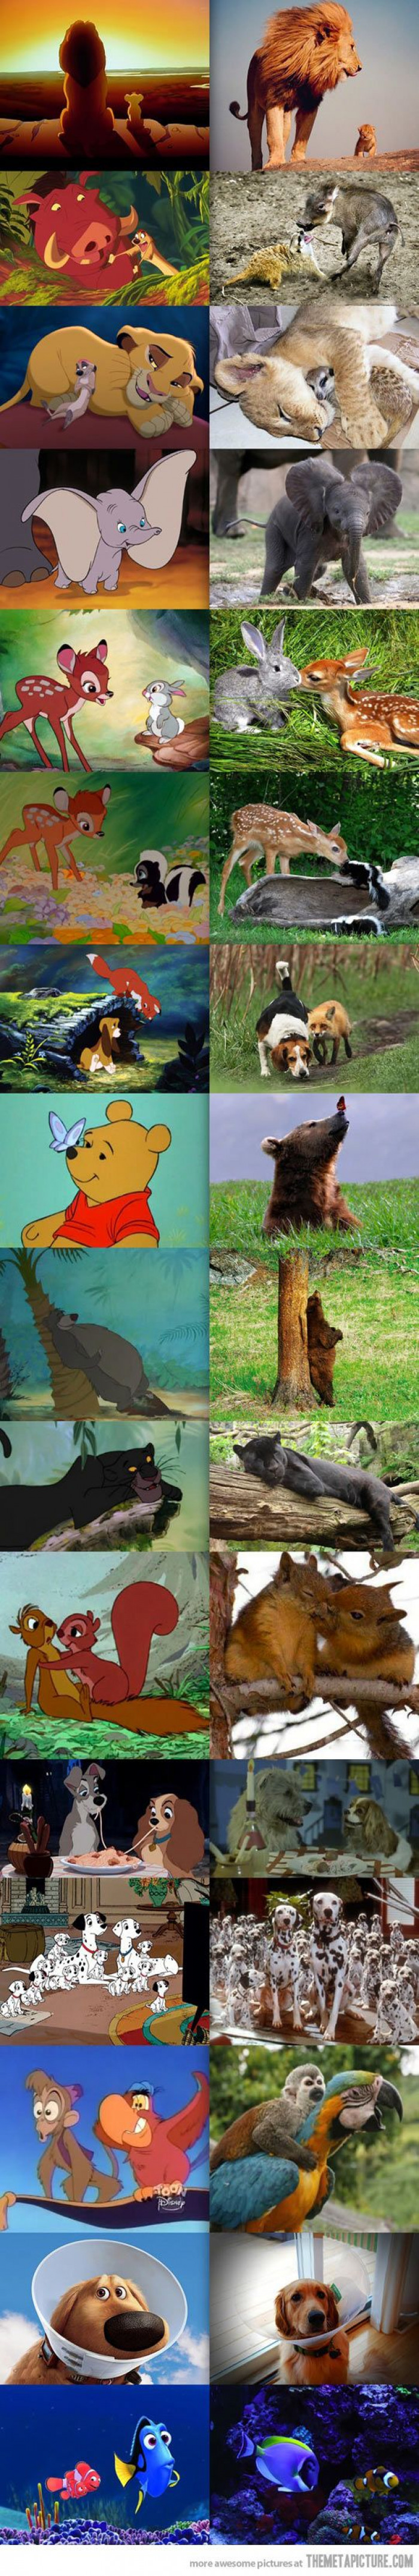 Disney Animals In Real Life